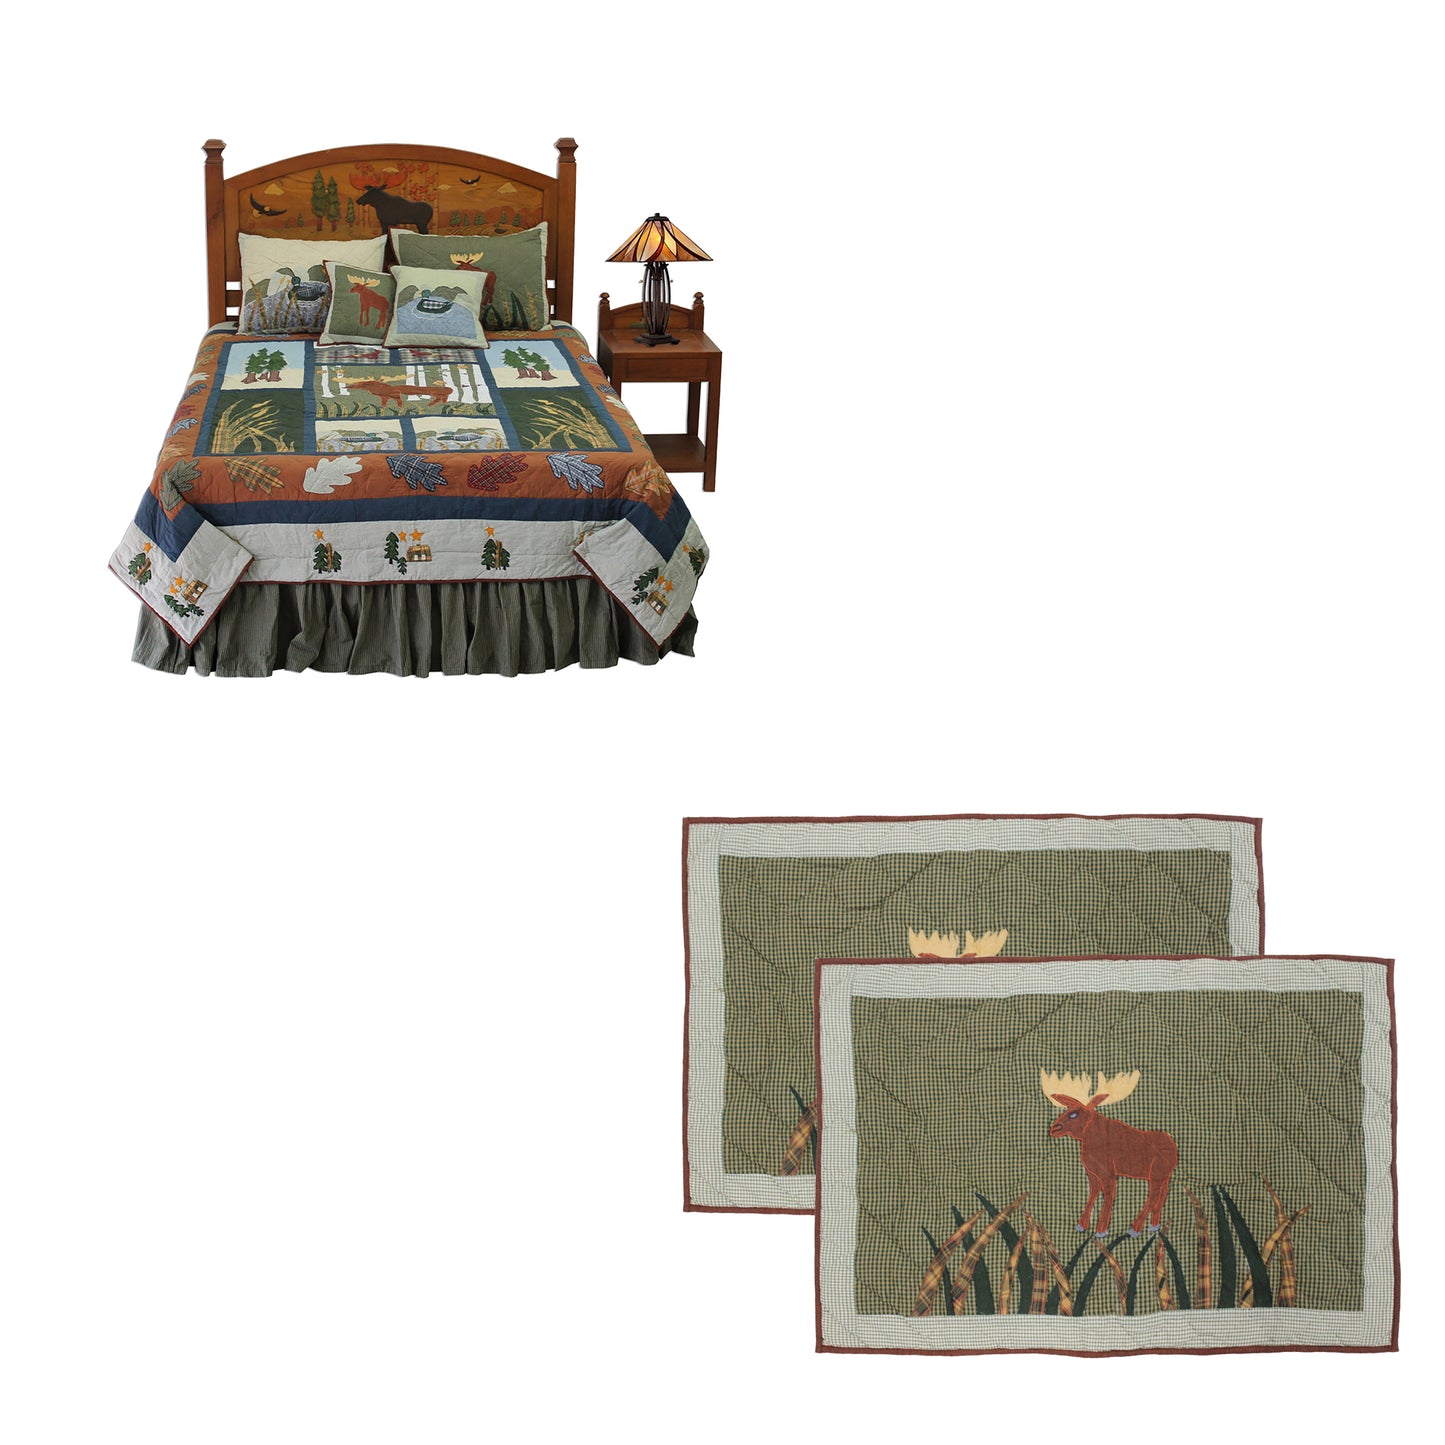 Quilted Moose Bedding accessories and Ensemble sets.